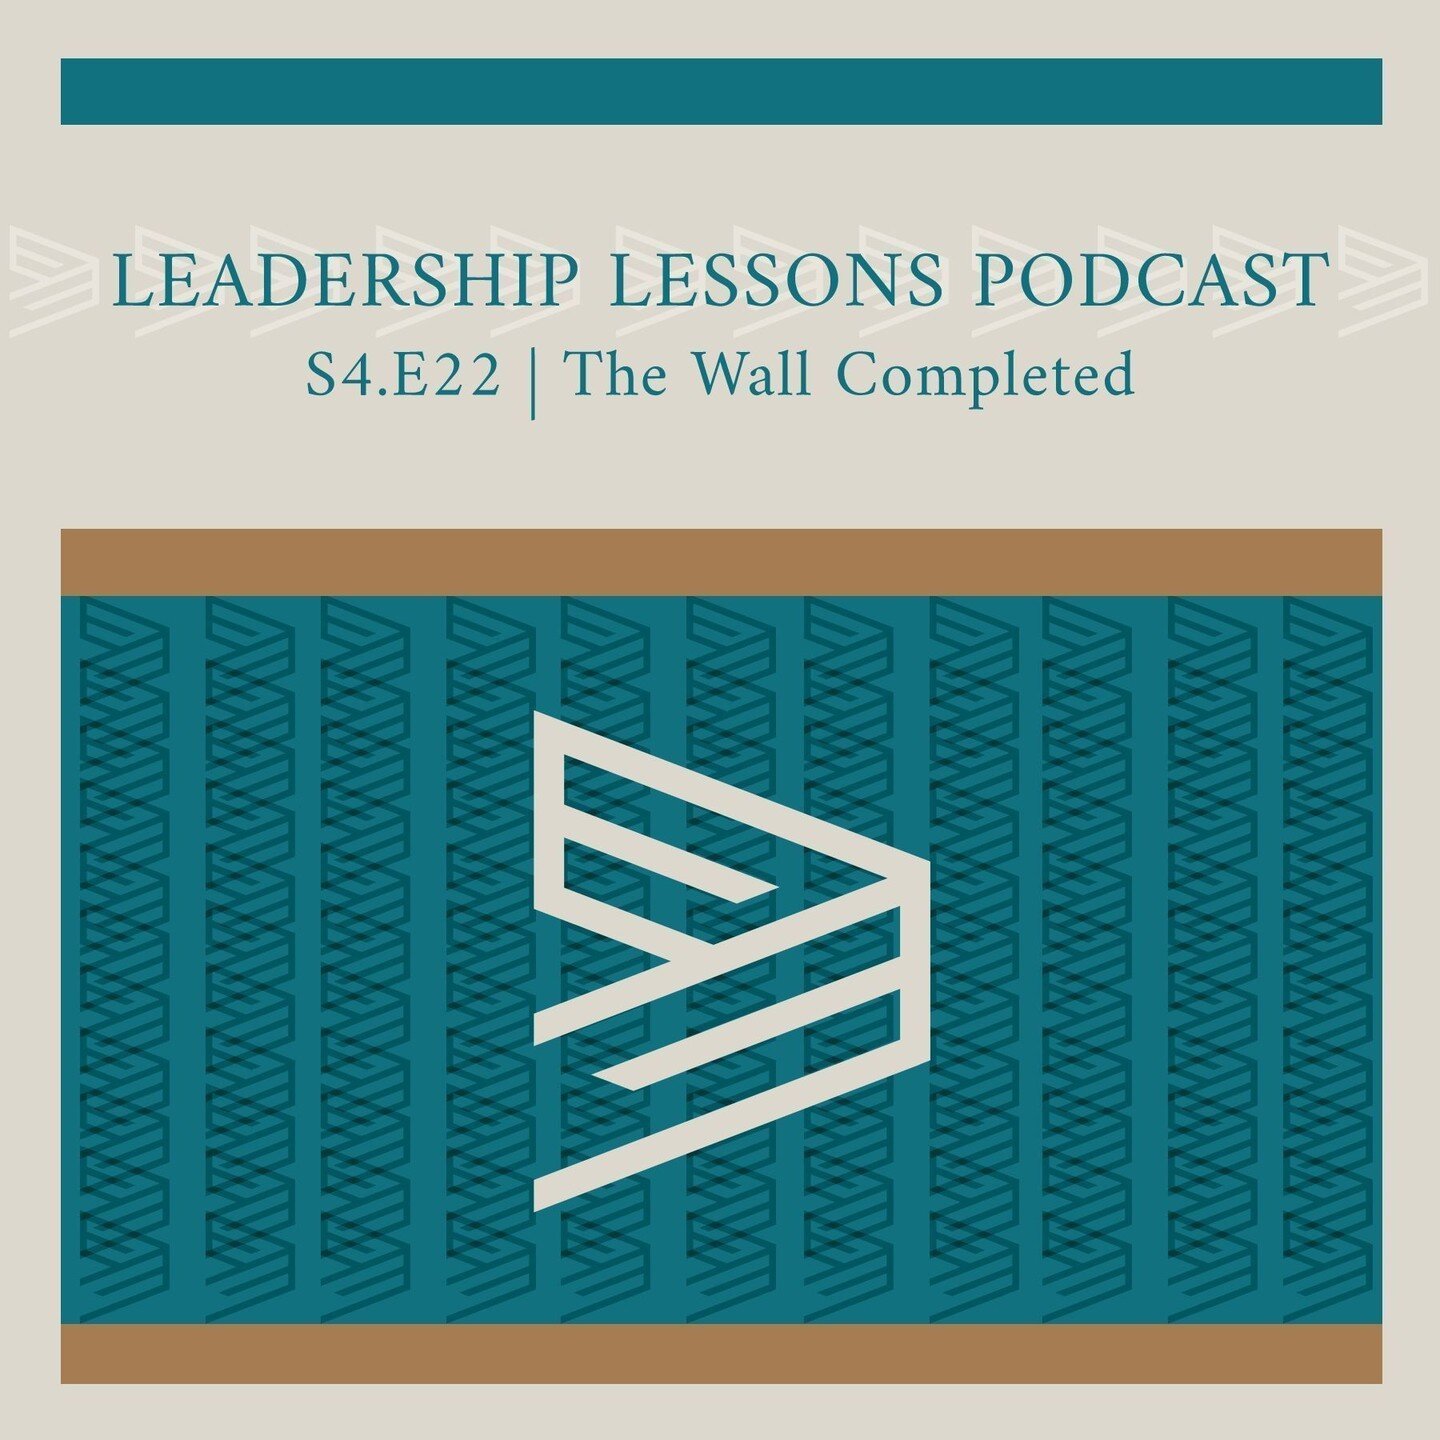 EE Leaders | Leadership Lessons Podcasts Season 4 Episode 22- The Wall Completed 
In this final episode from Season 4, Nehemiah 6:15-16, Pastor Daniel observes Nehemiah as he finishes the task God has given him&mdash;the wall is completed in a miracu